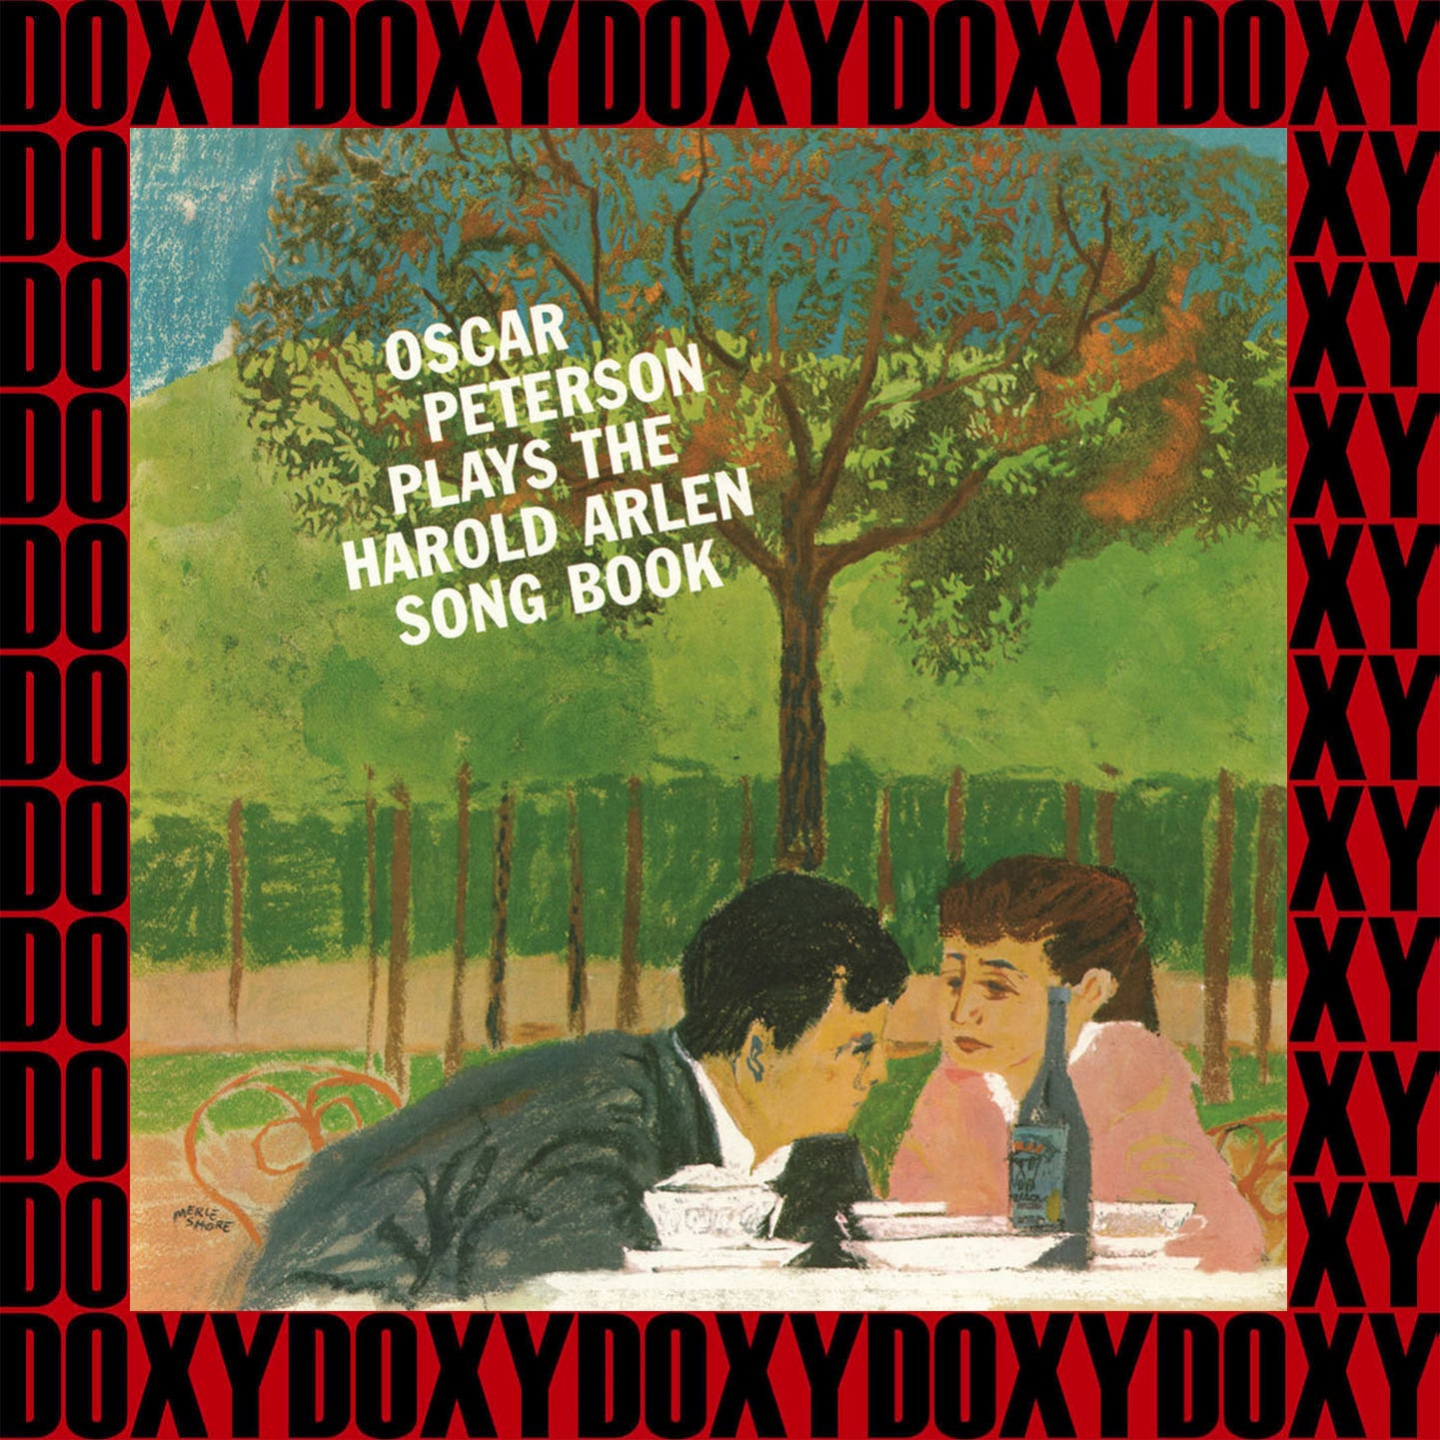 Plays the Harold Arlen Songbook (Remastered Version) (Doxy Collection)